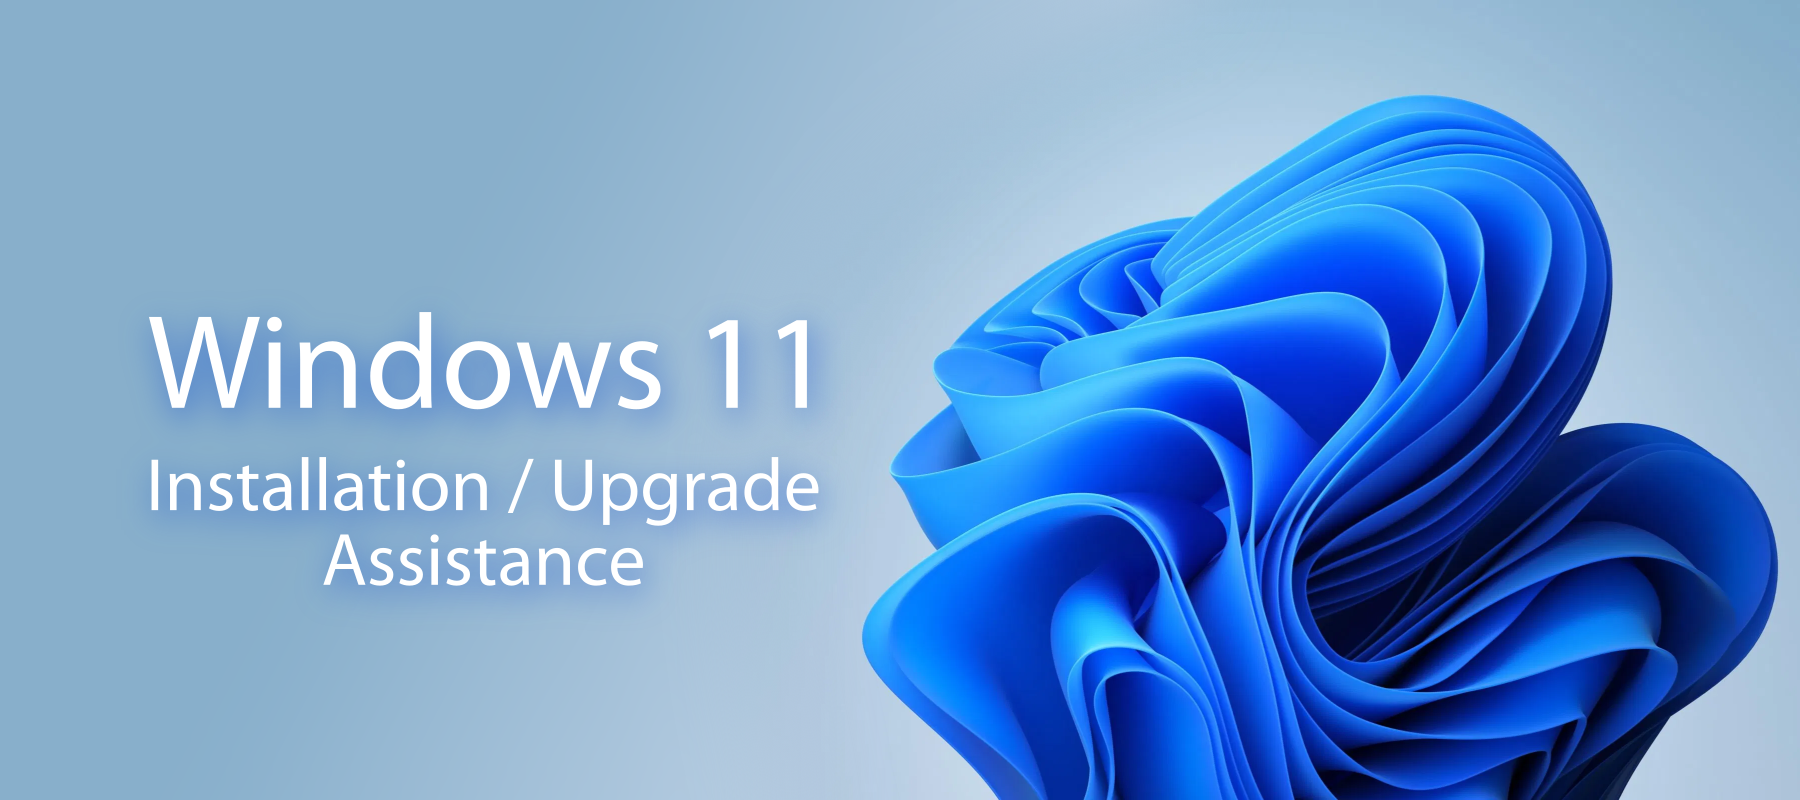 Need help installing or upgrading to Windows 11?